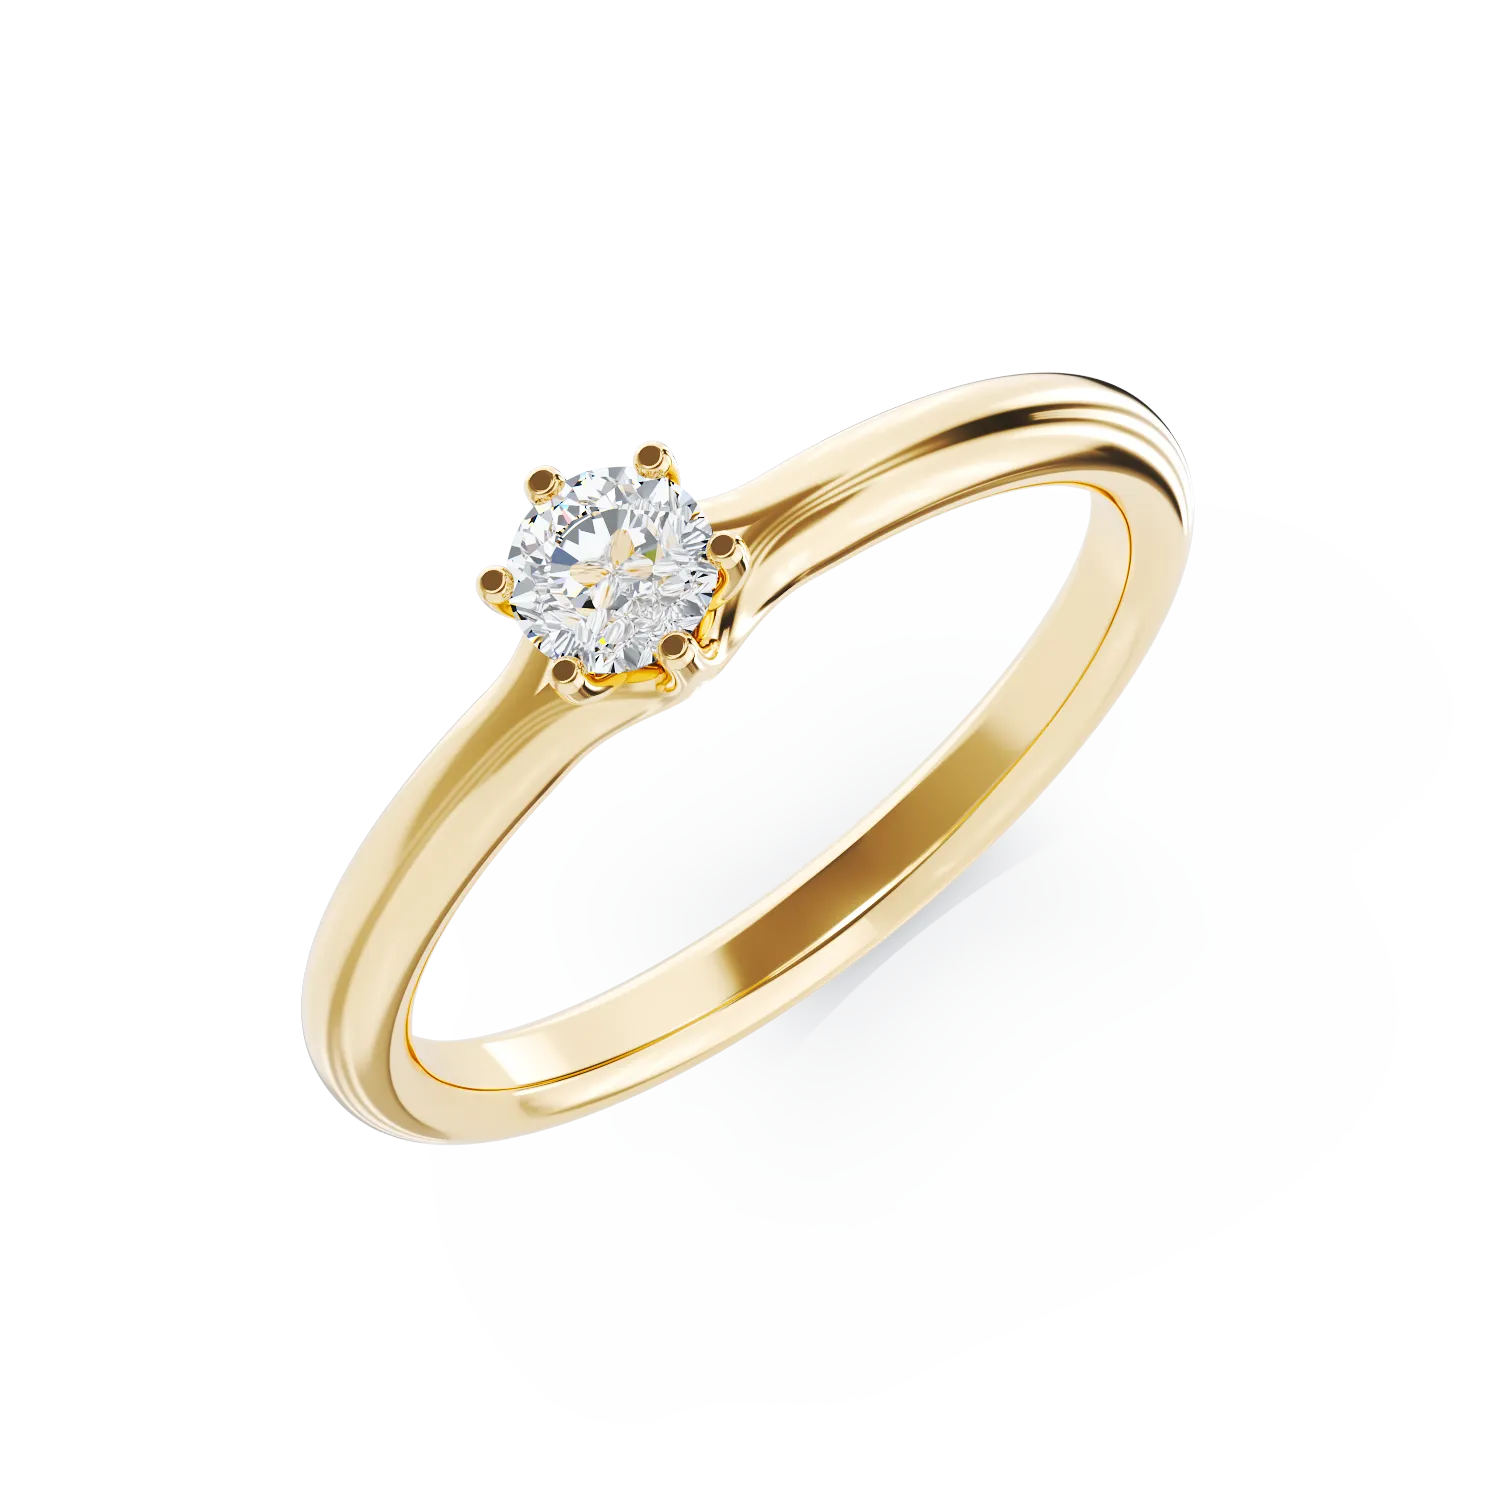 18k yellow gold engagement ring with 0.31ct diamond